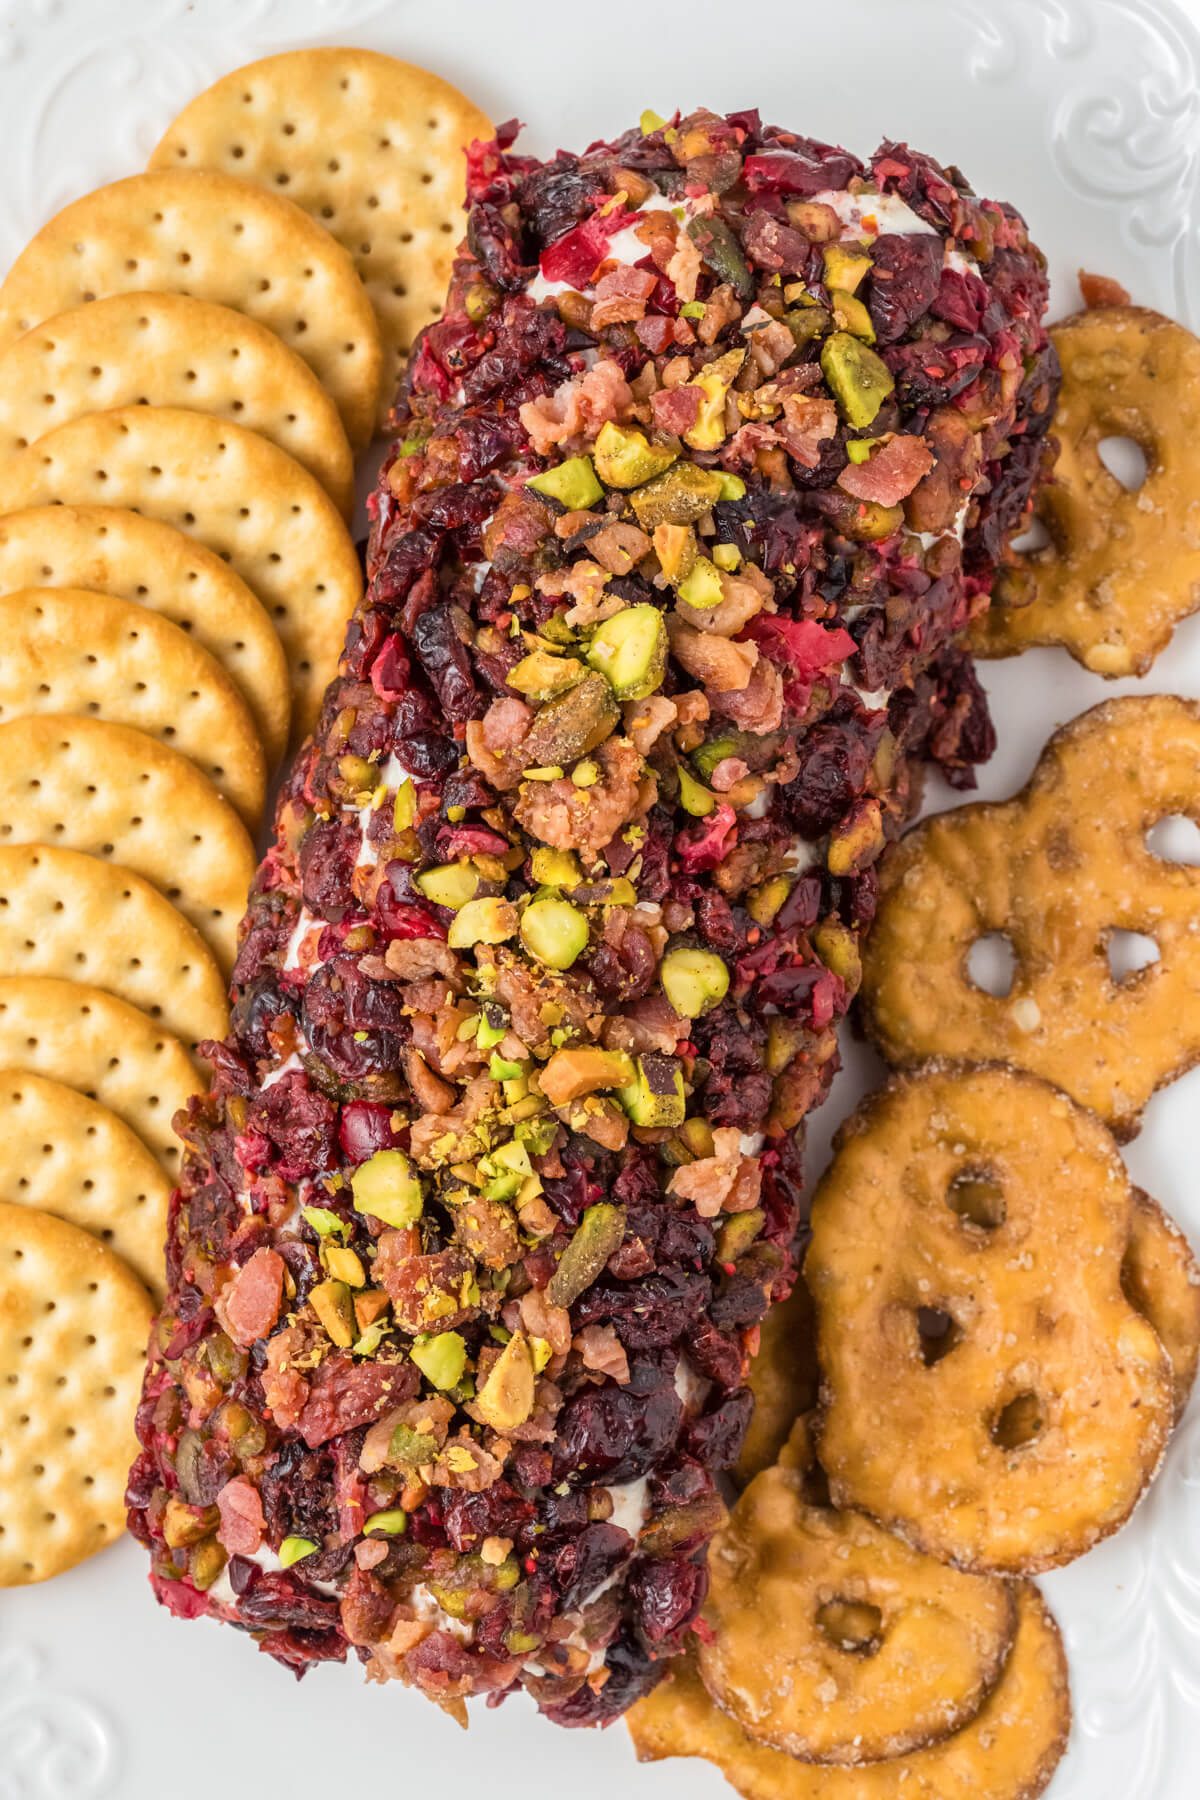 A whole honey coated pistachio and cranberry cheese log on a white plate surrounded by crackers.